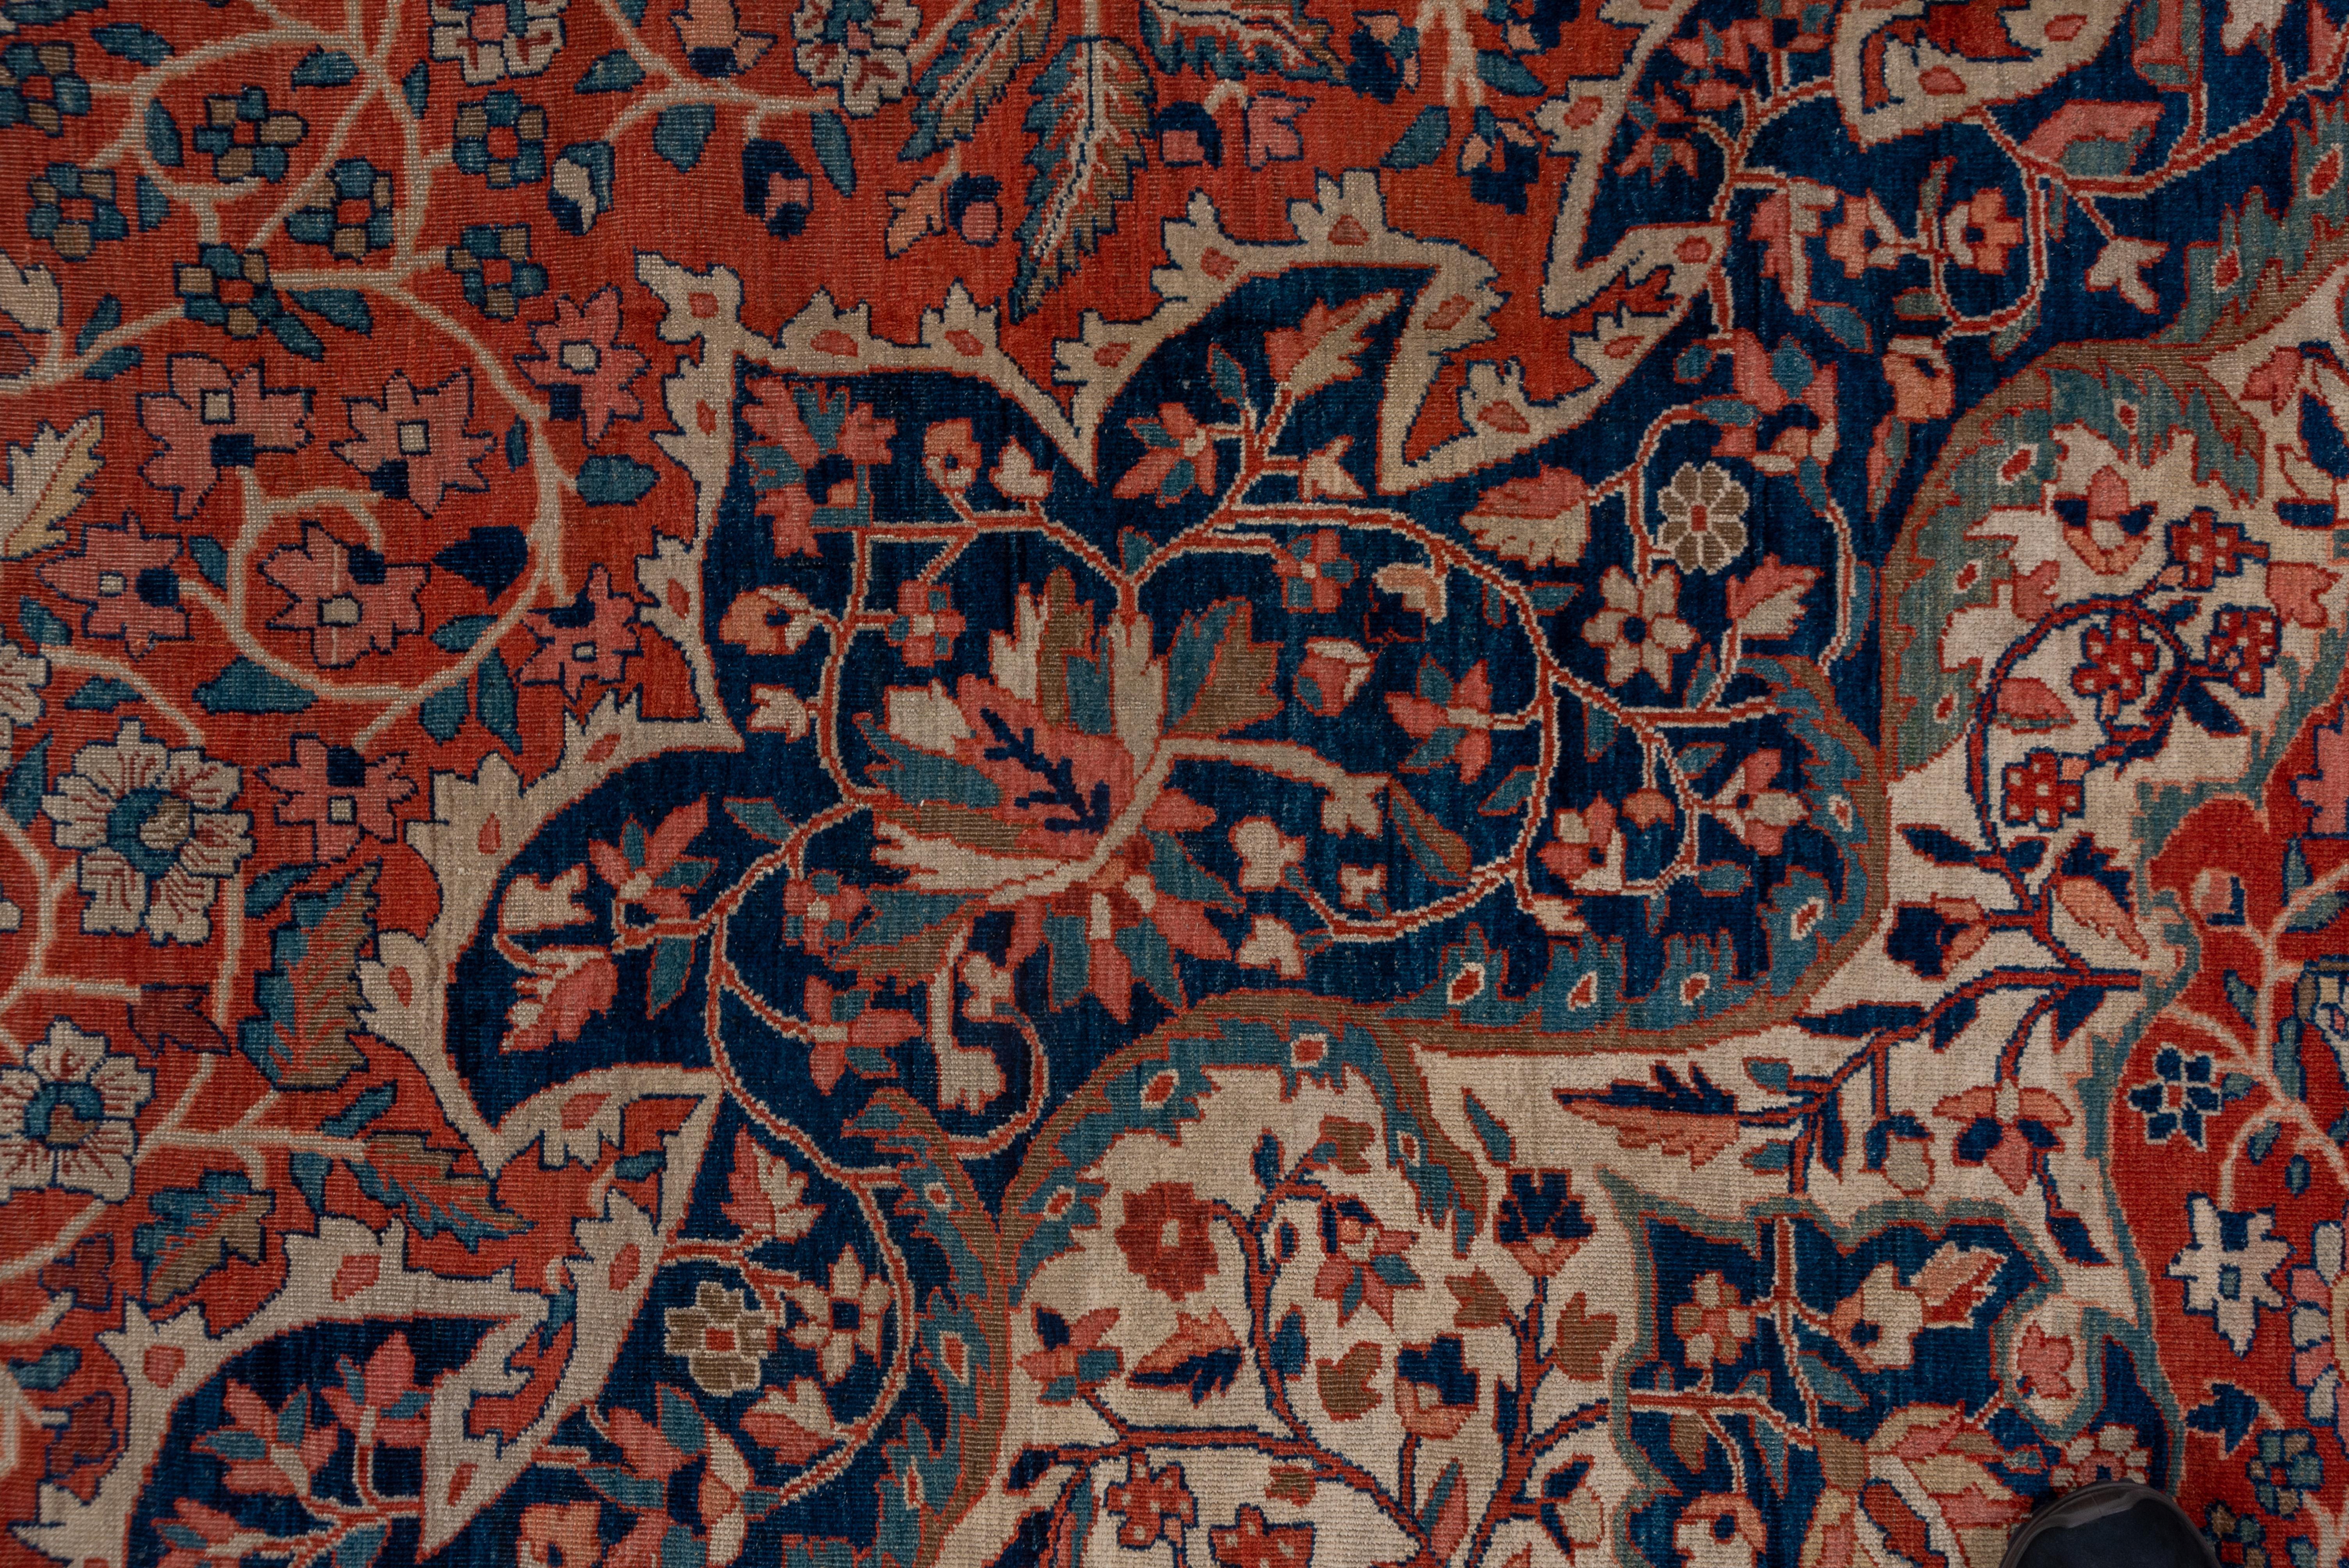 An elaborately octofoiled navy medallion with a sand bumpy lozenge sub-medallion with en suite extended corners, is set on the rust-red field with a dense floral arabesque pattern. Narrowi navy border of pointed oval palmettes with connecting fat